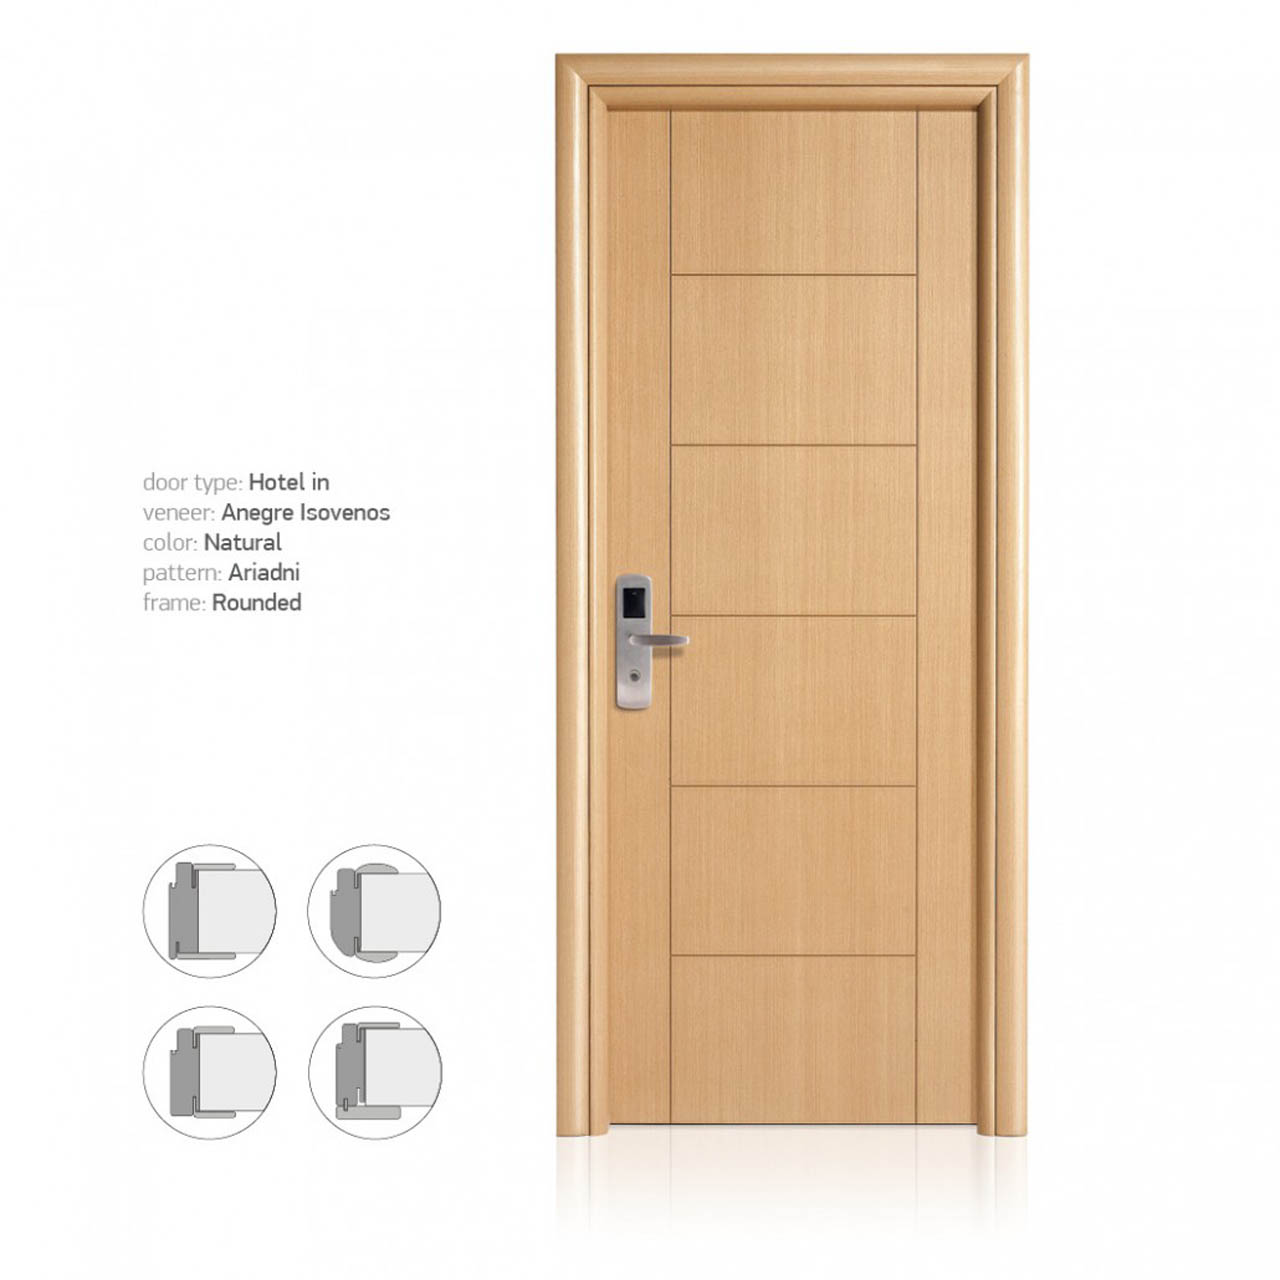 portes-site-hotel_in-eng3-1030x1030